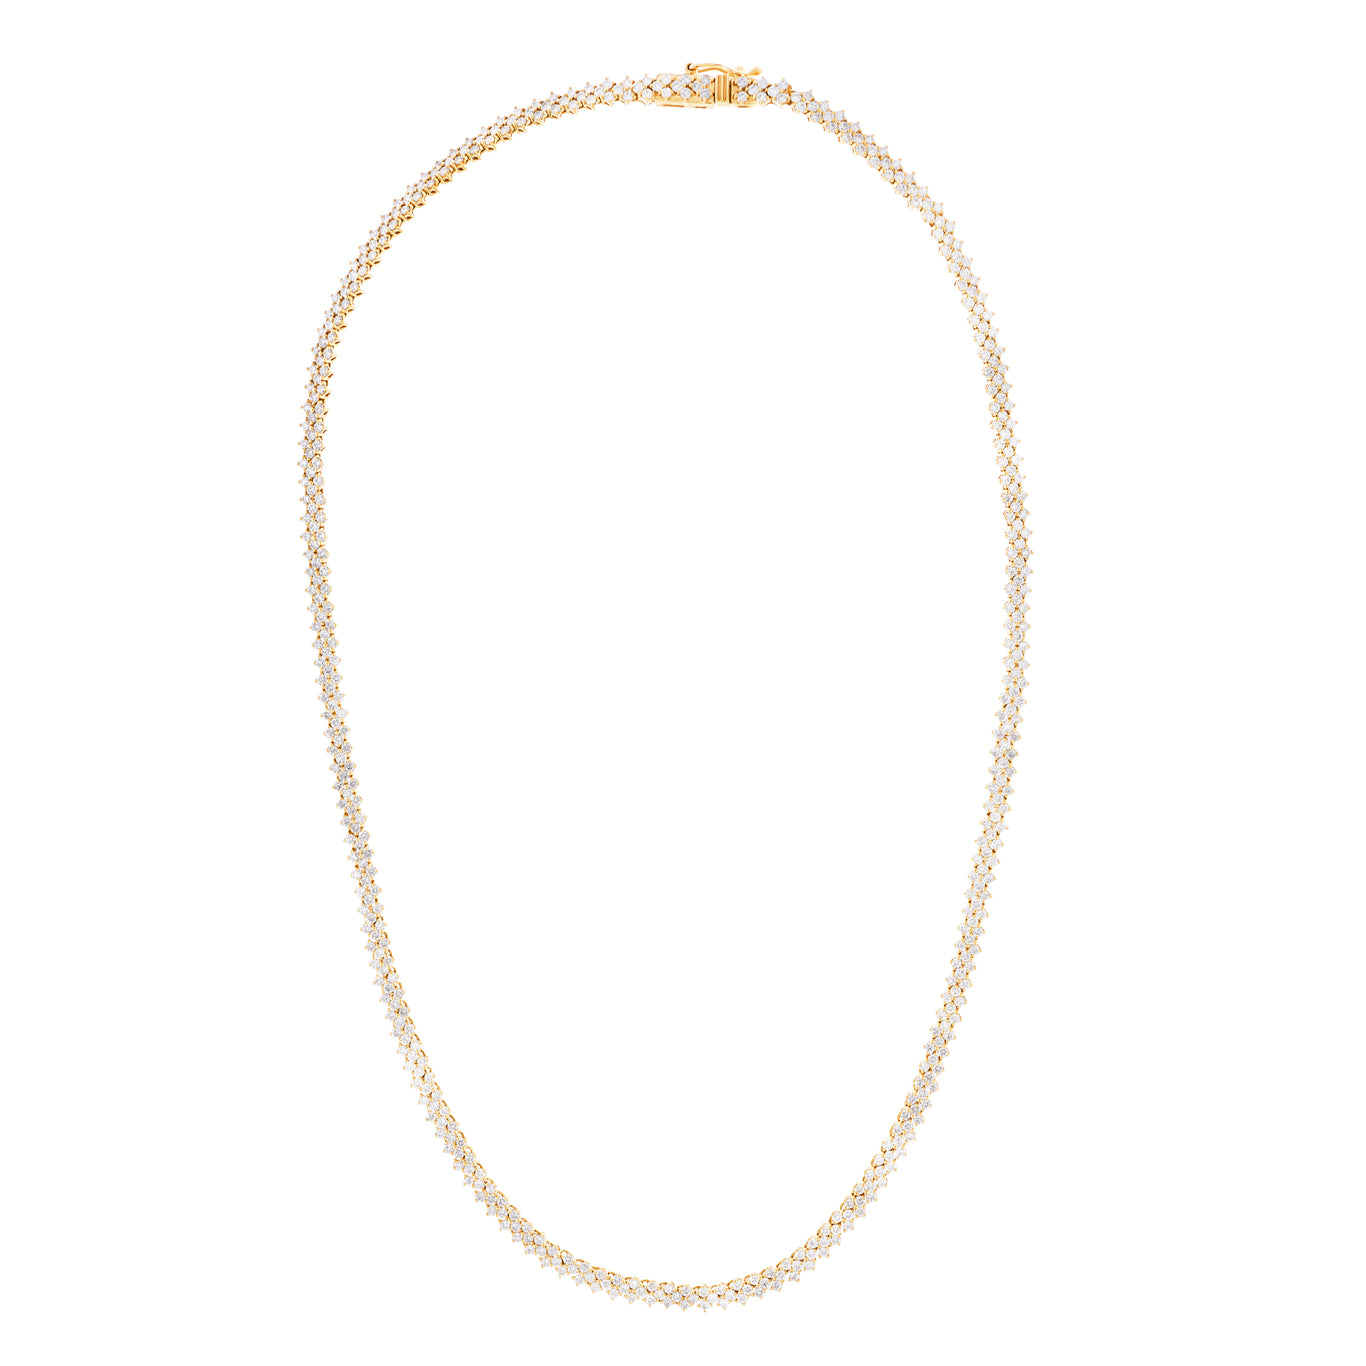 Chevron Tennis Necklace in Yellow Gold